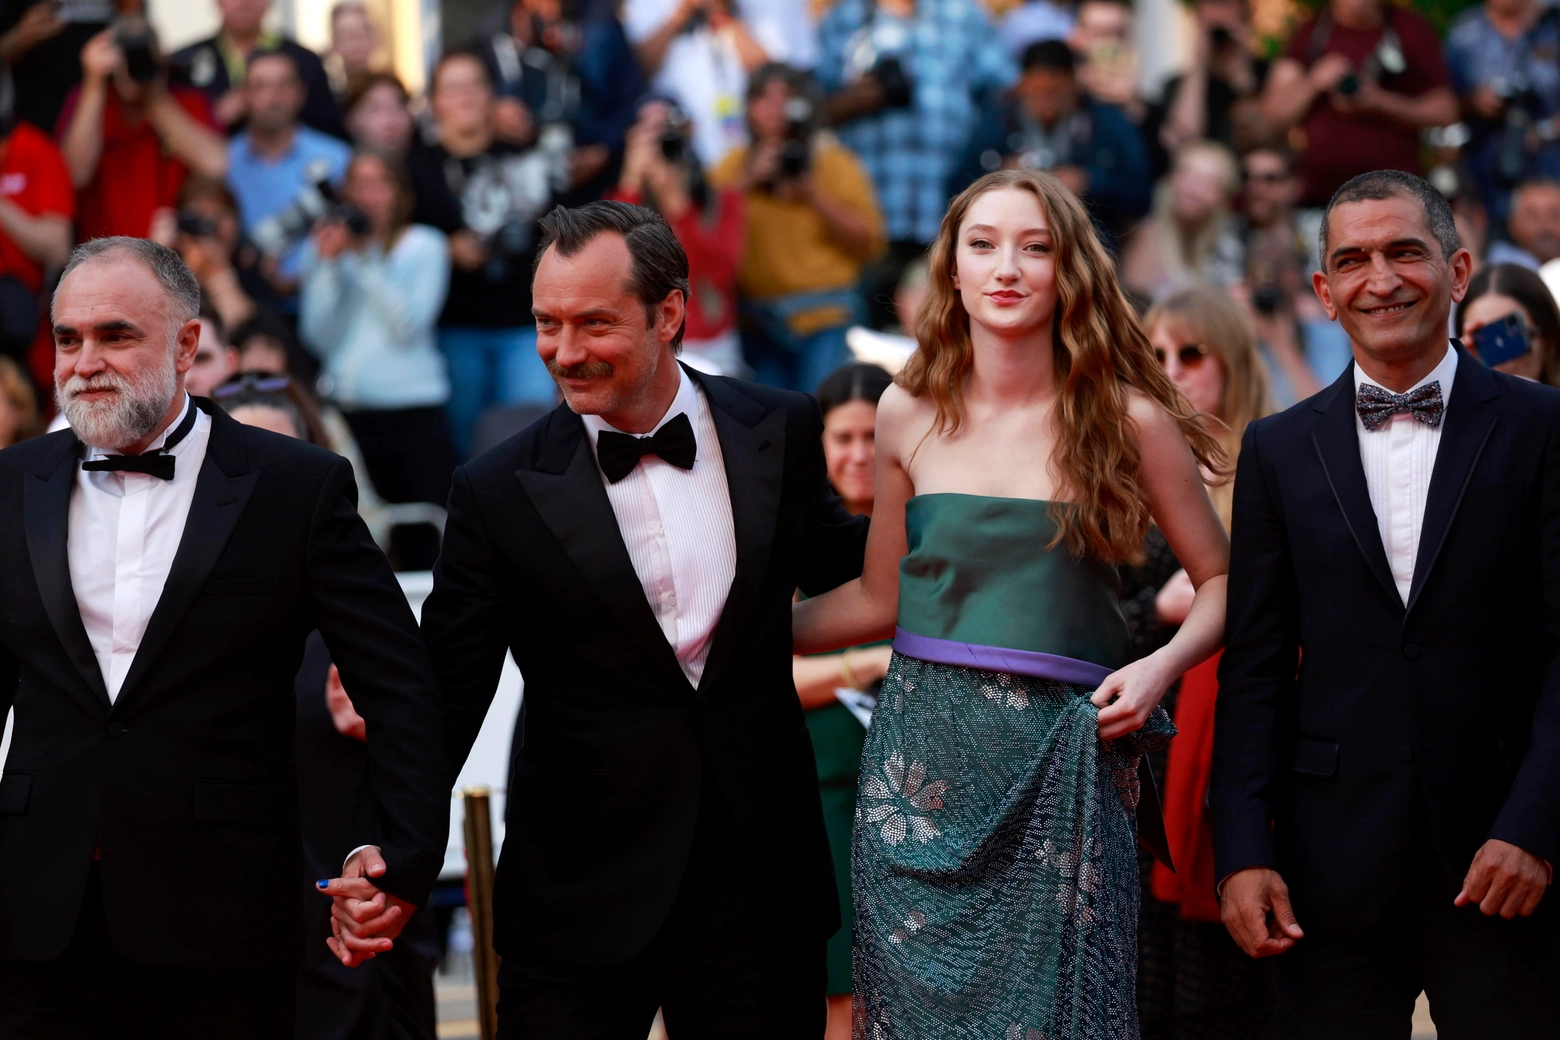 epa10644377 (L-R) Director Karim Ainouz, Jude Law, Junia Rees, and Amr Waked arrive for the screening of 'Le Jeu de la reine' (Firebrand) during the 76th annual Cannes Film Festival, in Cannes, France, 21 May 2023. The movie is presented in the Official Competition of the festival which runs from 16 to 27 May.  EPA/GUILLAUME HORCAJUELO